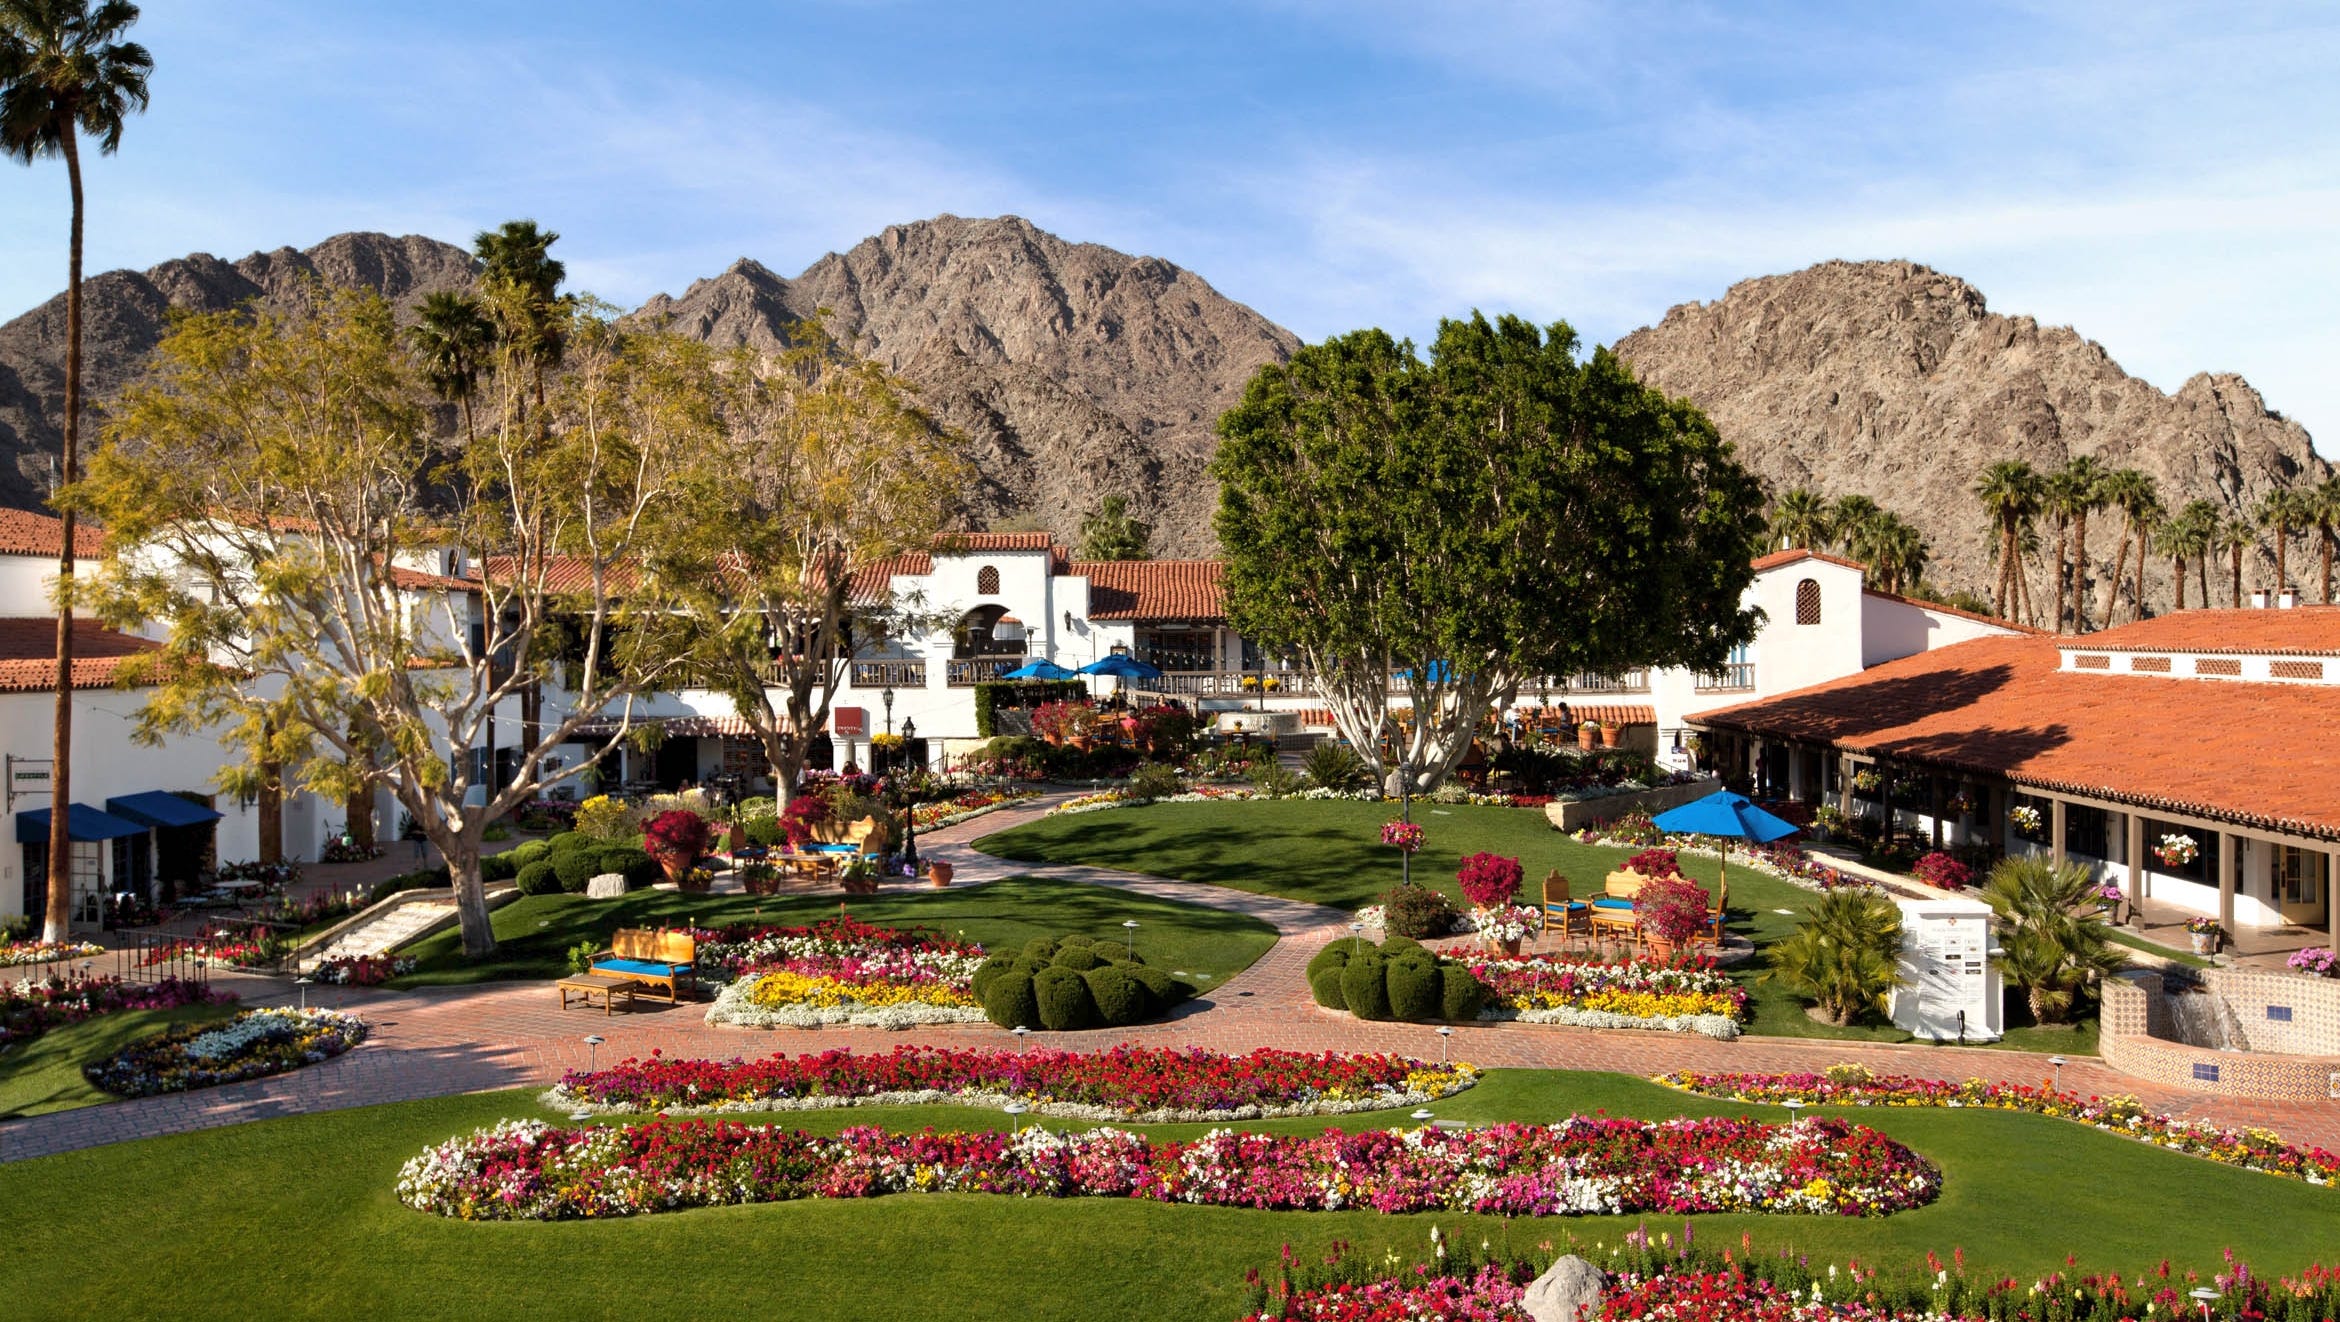 La Quinta Resort and PGA West sold to New York private equity firm